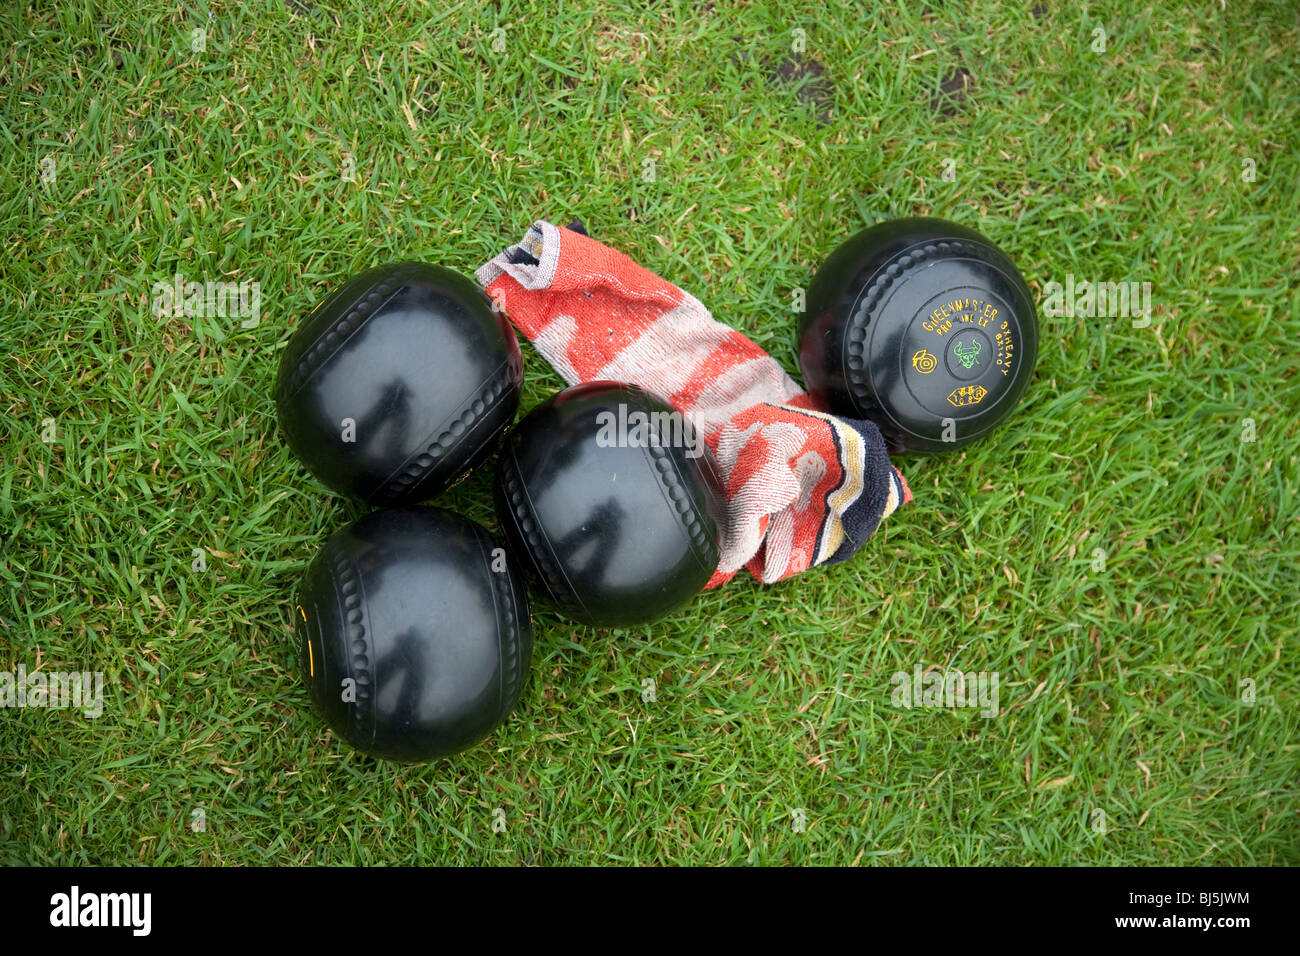 Crown green bowling balls bowls and cloth on grass Stock Photo